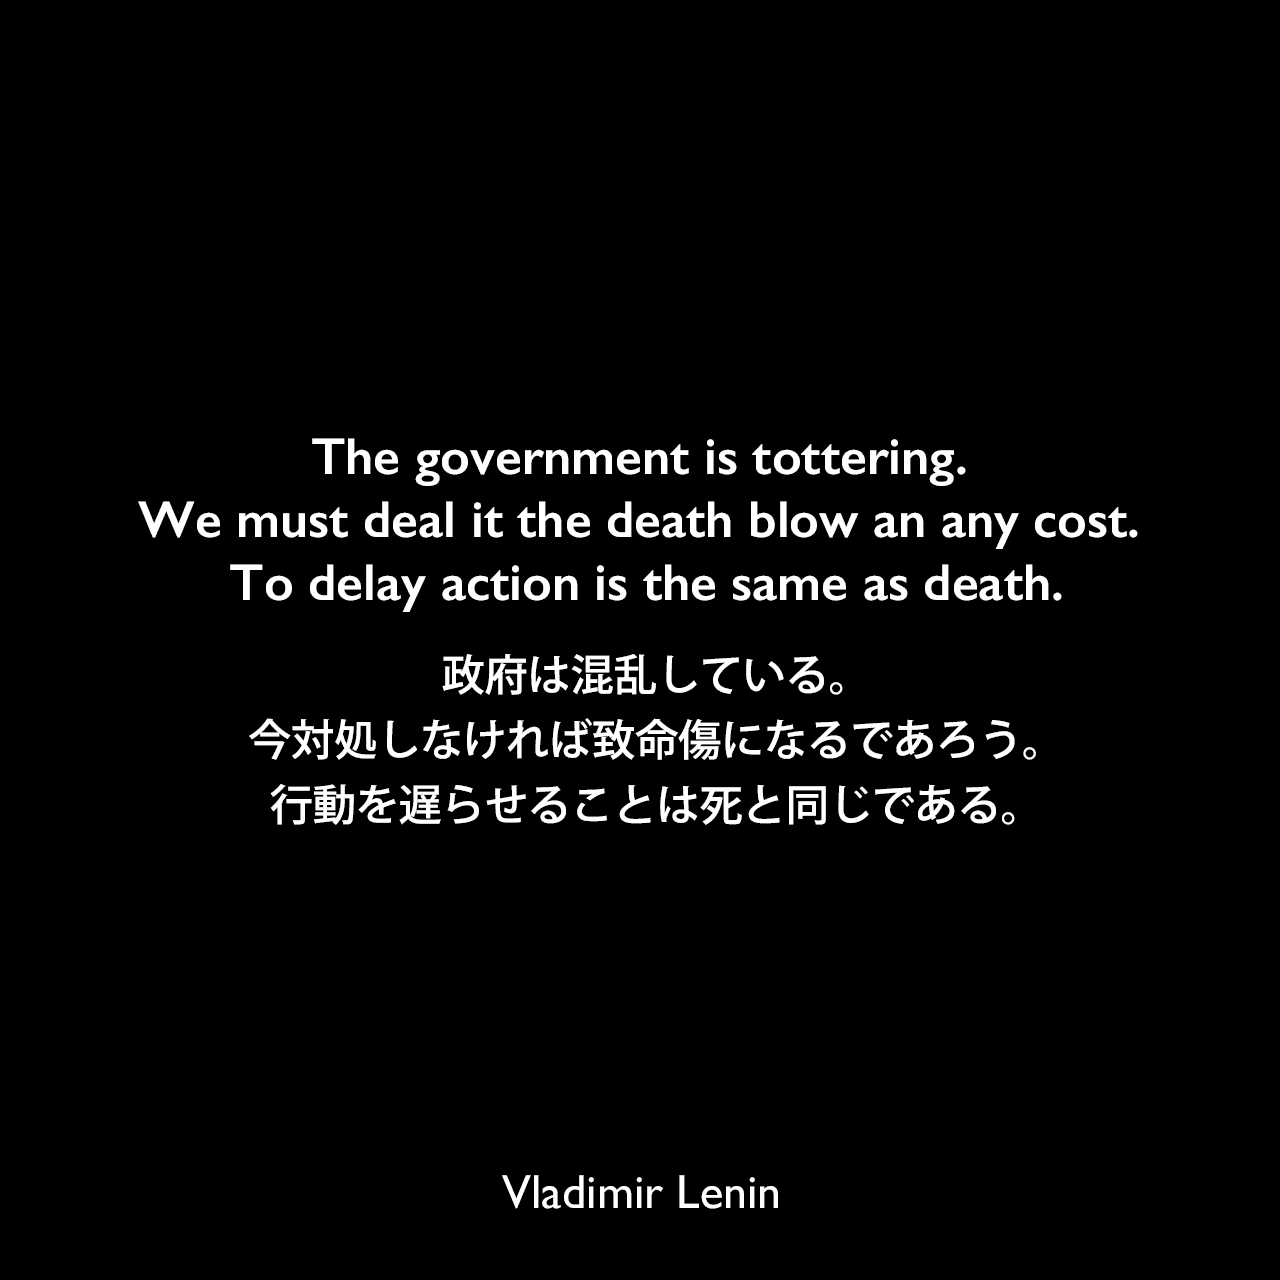 The government is tottering. We must deal it the death blow an any cost. To delay action is the same as death.政府は混乱している。今対処しなければ致命傷になるであろう。行動を遅らせることは死と同じである。Vladimir Lenin